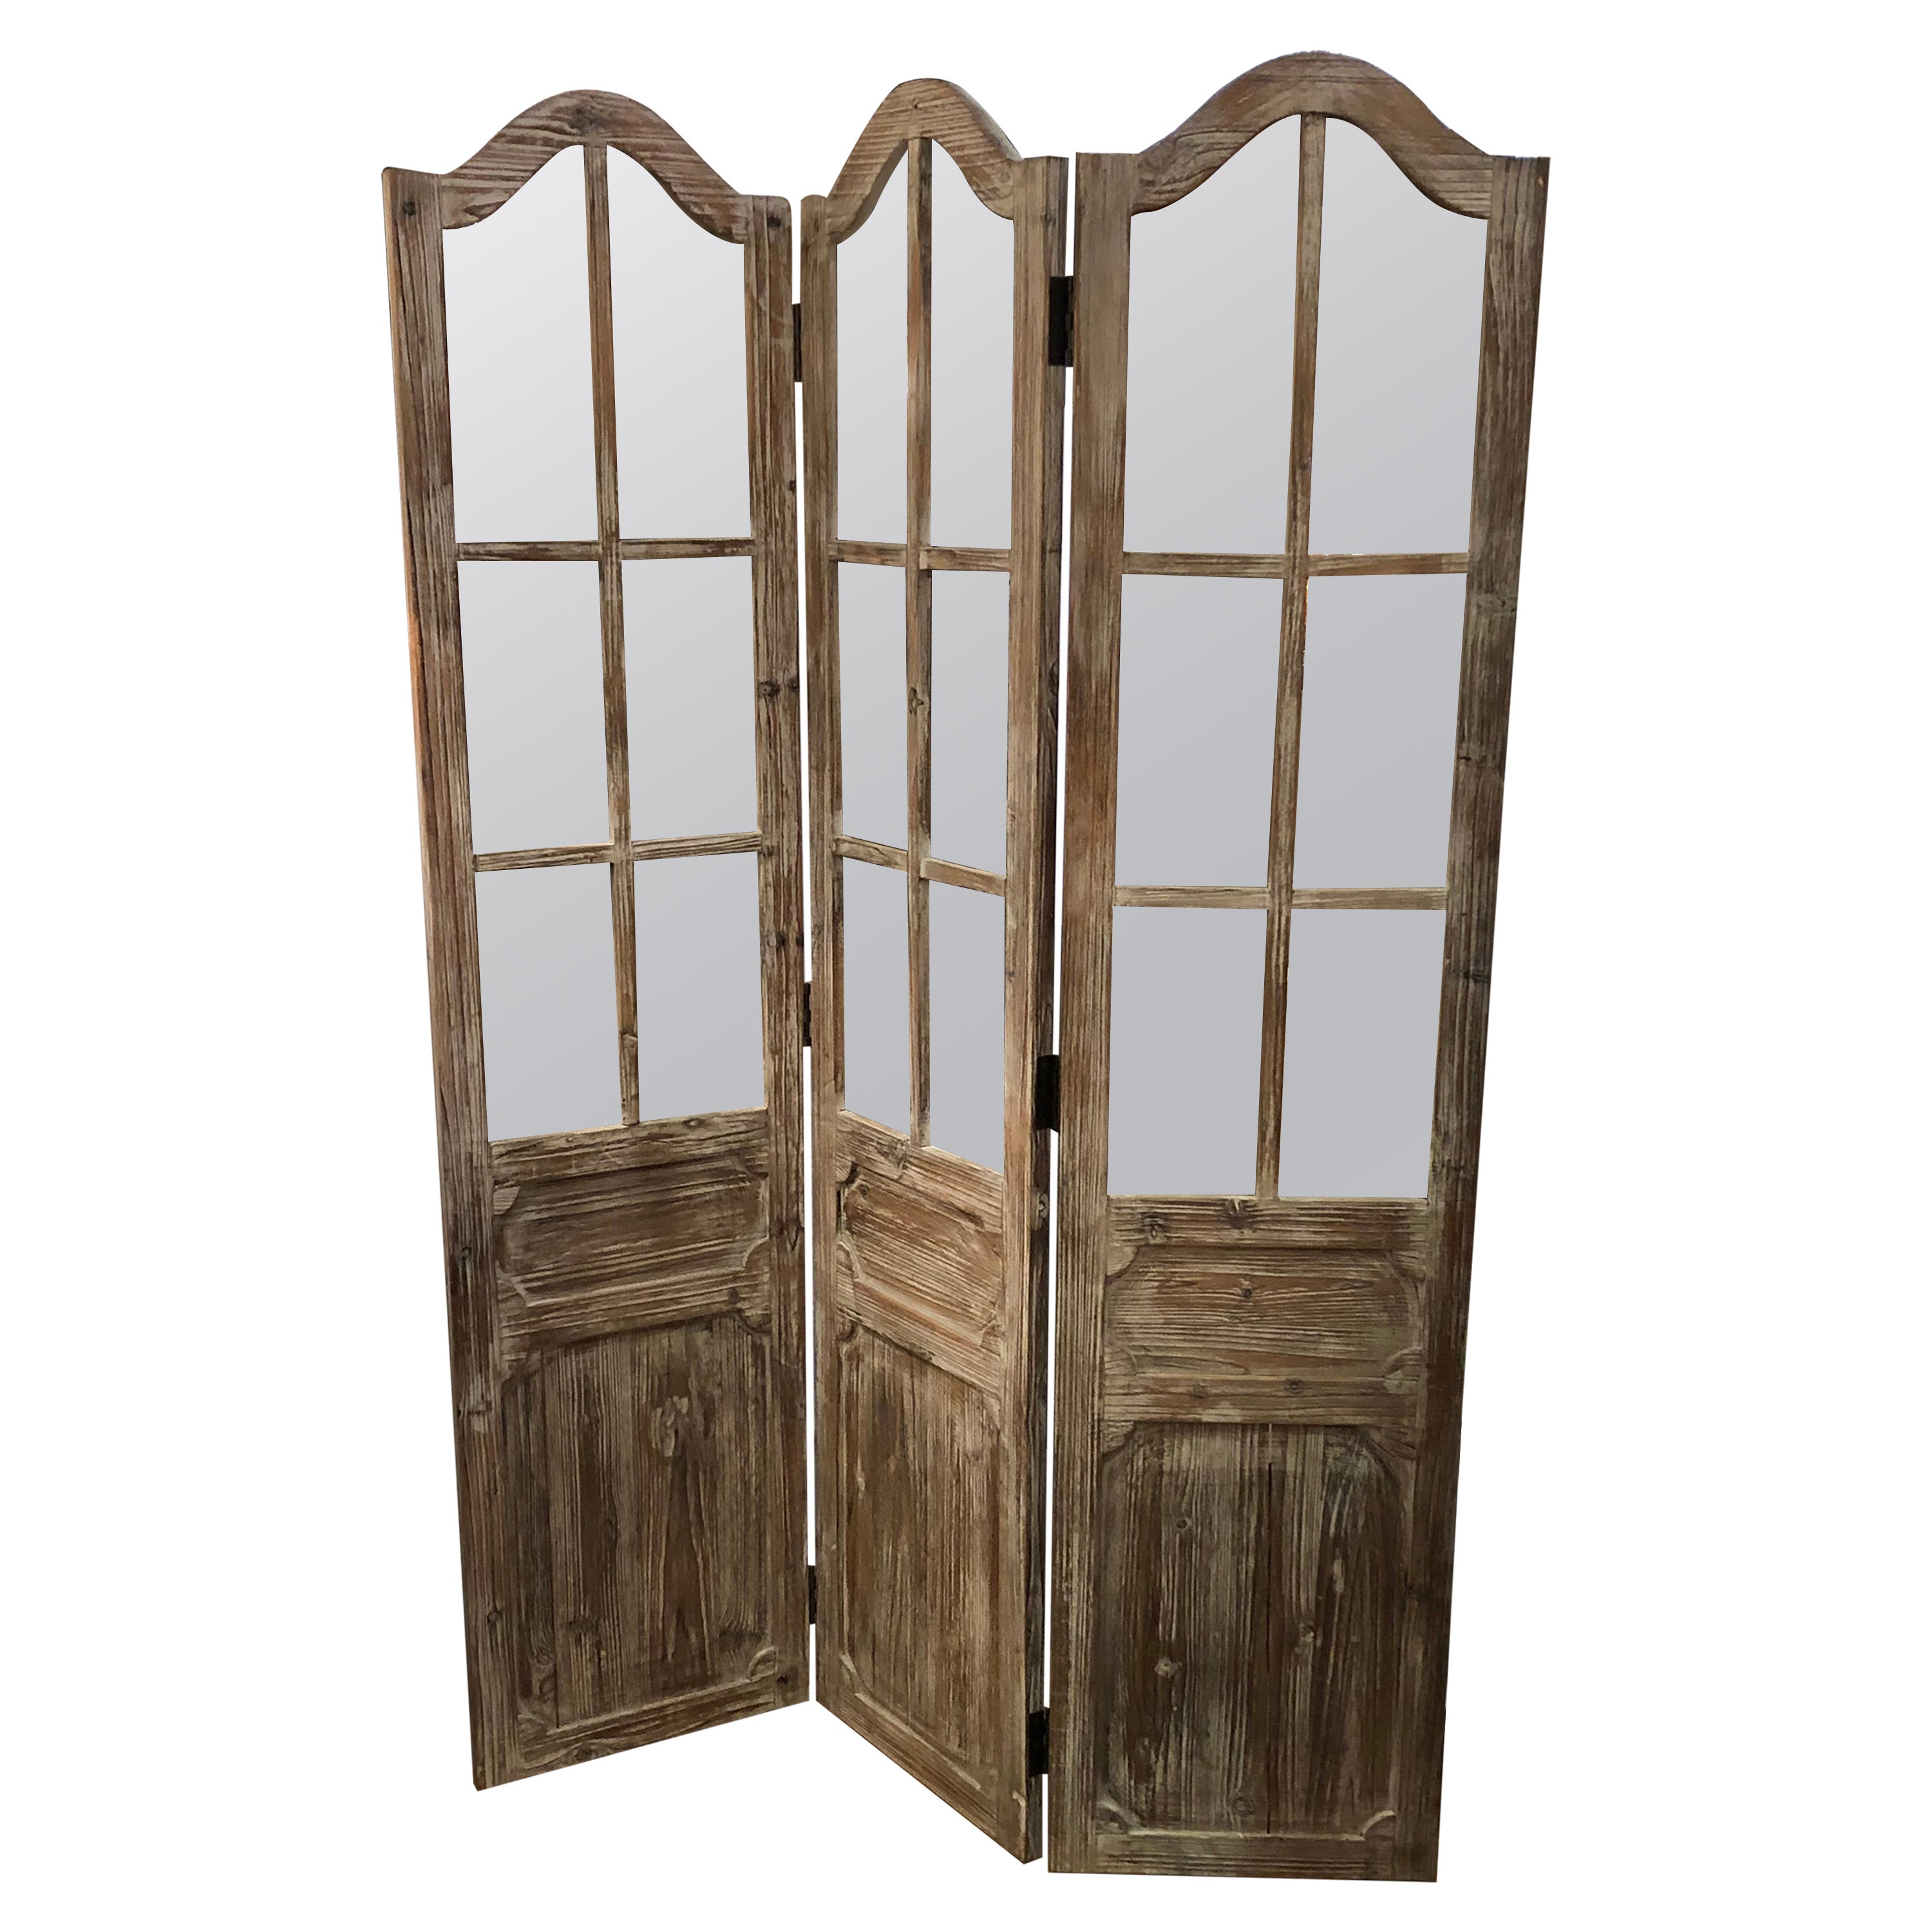 Great Looking Distressed Wood 3 Panel Screen Room Divider For Sale